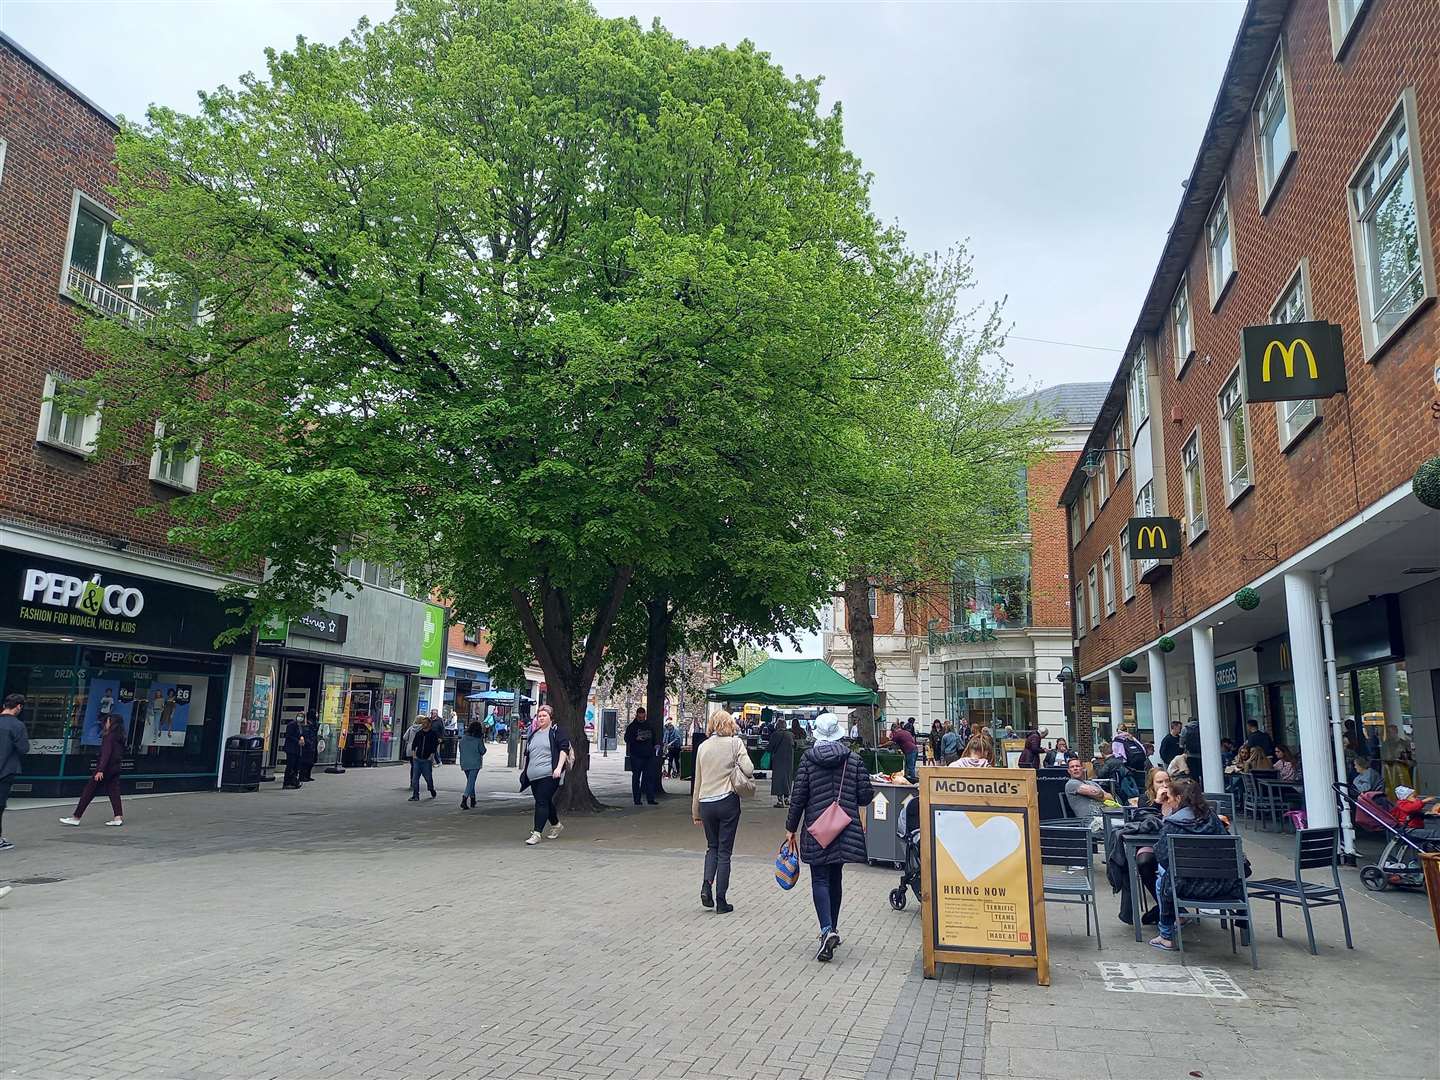 Five trees in the city's high street were set to be chopped down